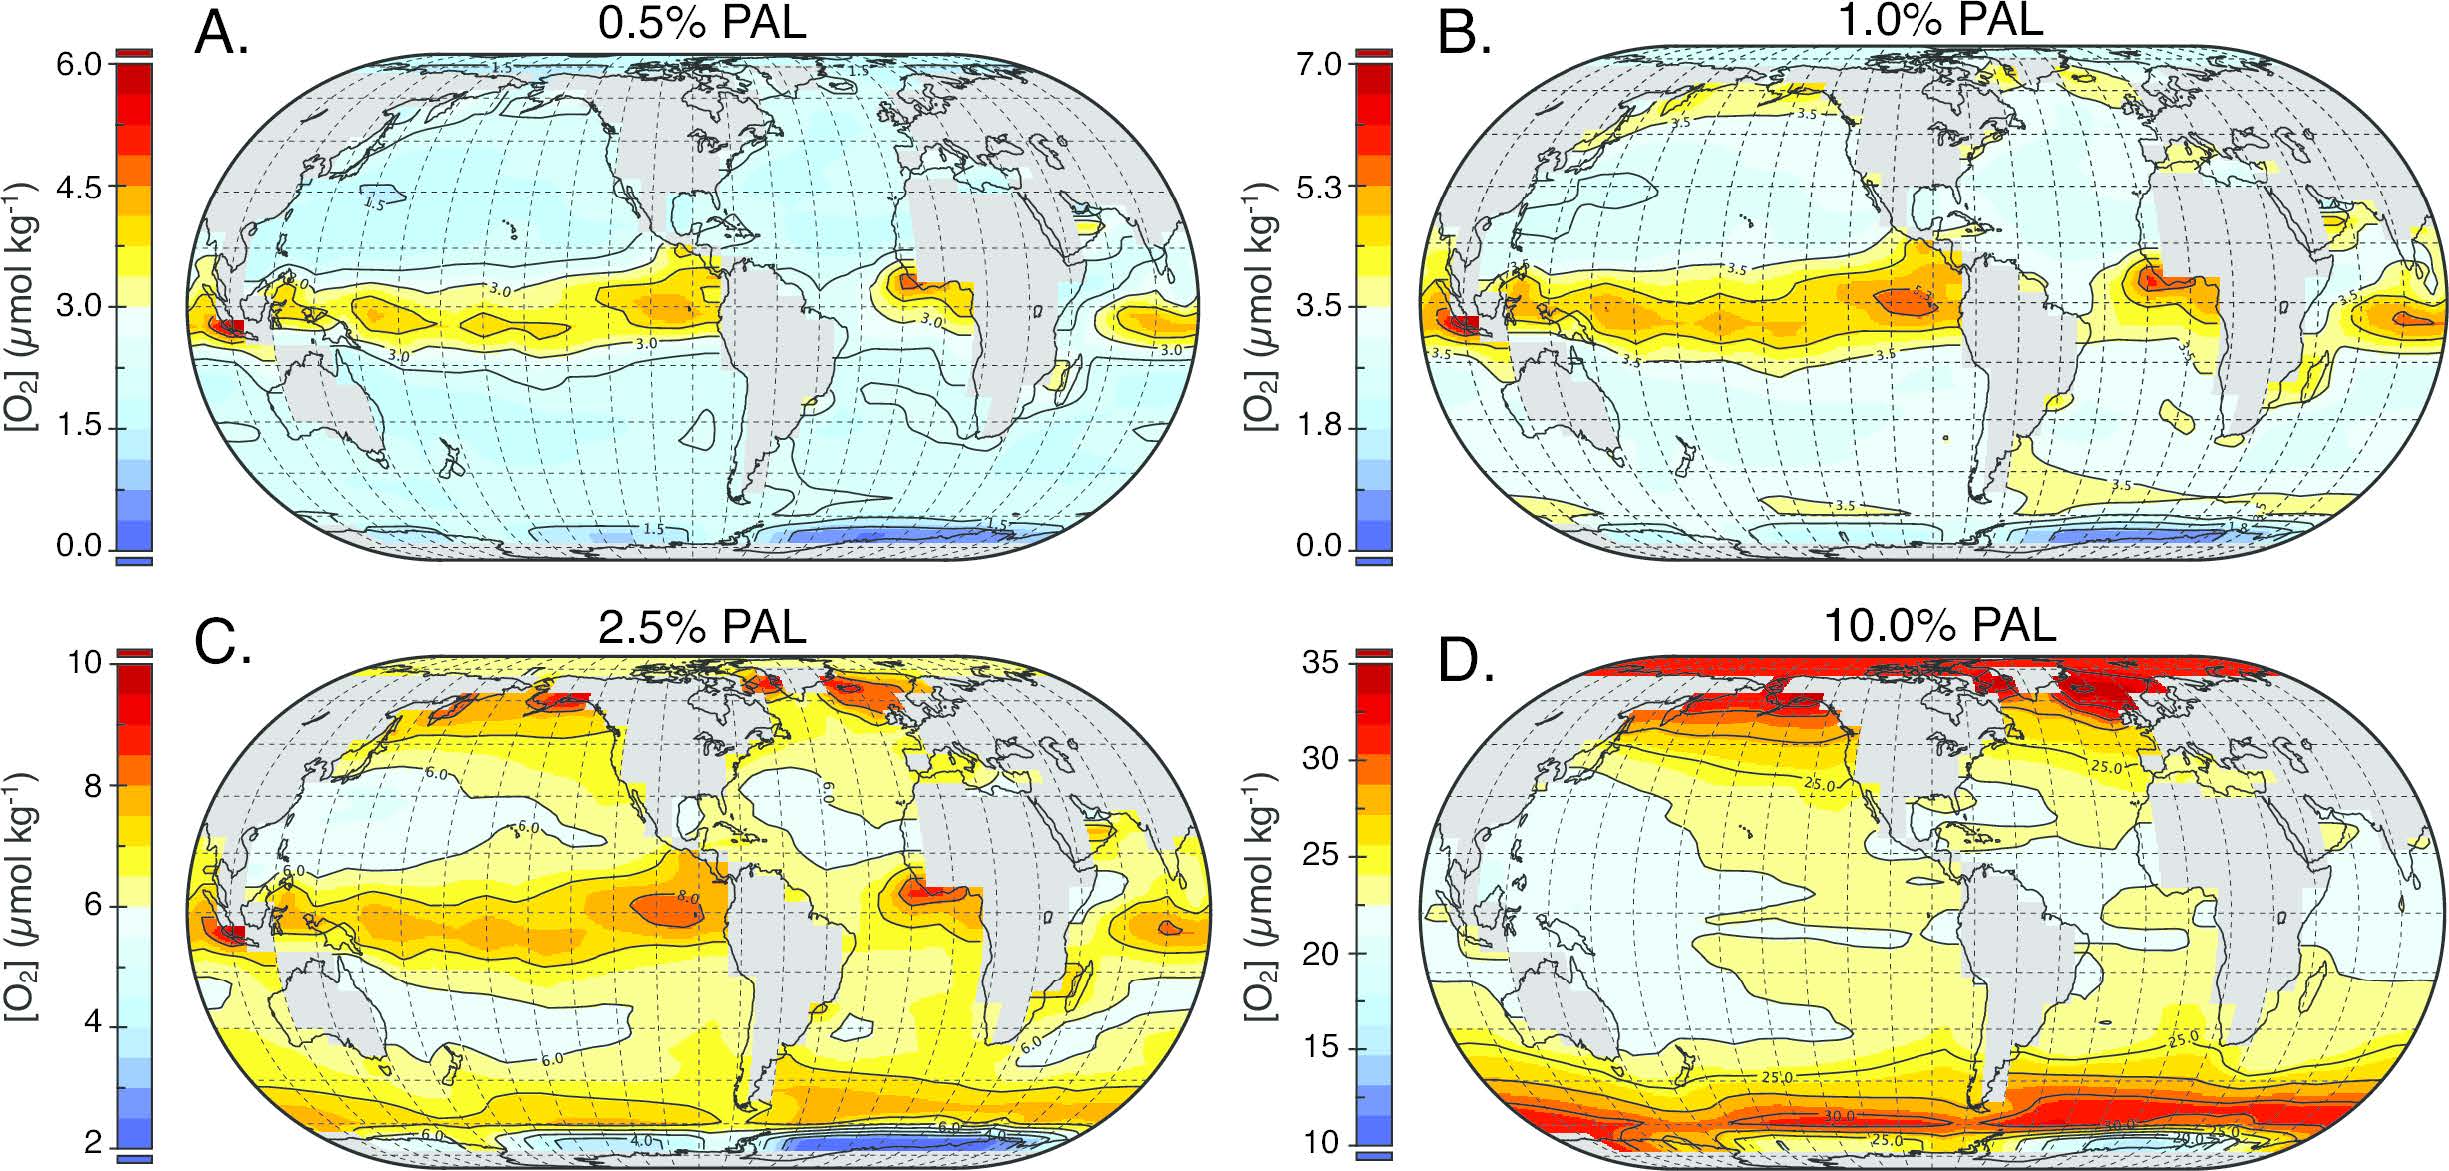 A team led by Chris Reinhard simulated oceanic oxygen distributions during the Proterozoic Eon with the help of computational modeling. The depictions represent distributions corresponding to varying levels of atmospheric oxygen ranging from 0.5 to 10 percent.